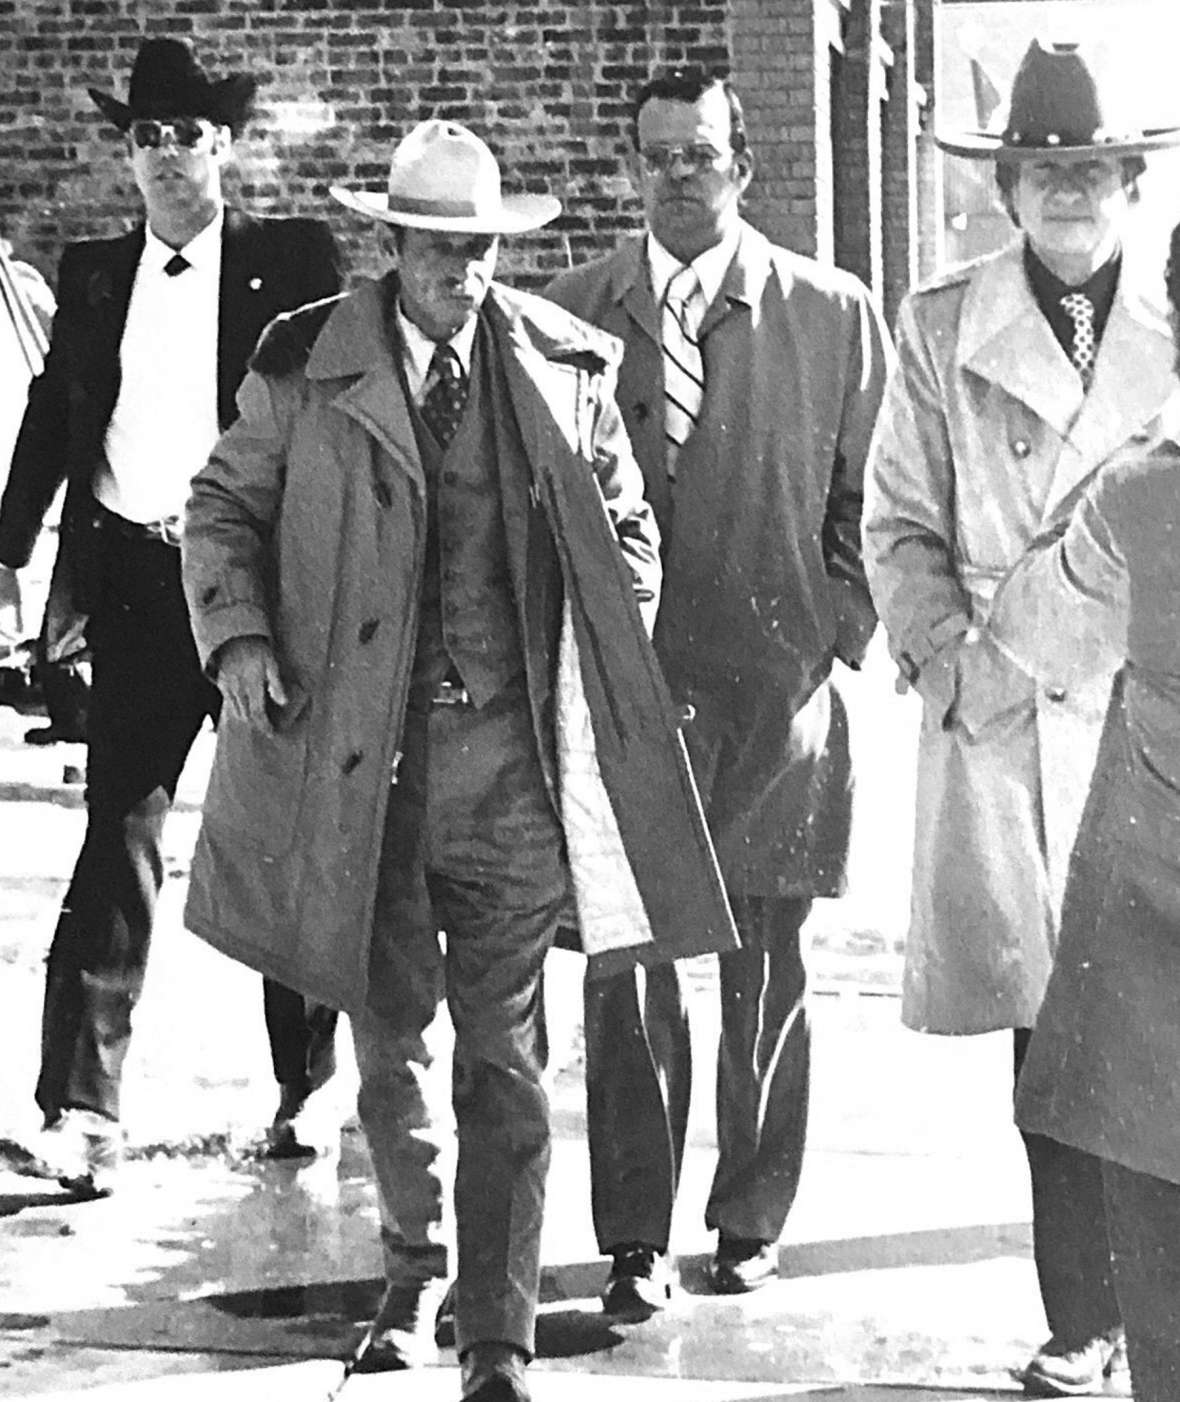 Escorting Ed Cantrell, second from left, to the first day of the preliminary hearing are Rock Springs police officer Dan Zeigler, police Lt. Robert Overy and, at far right, Cantrell’s lawyer, Gerry Spence. Author photo.